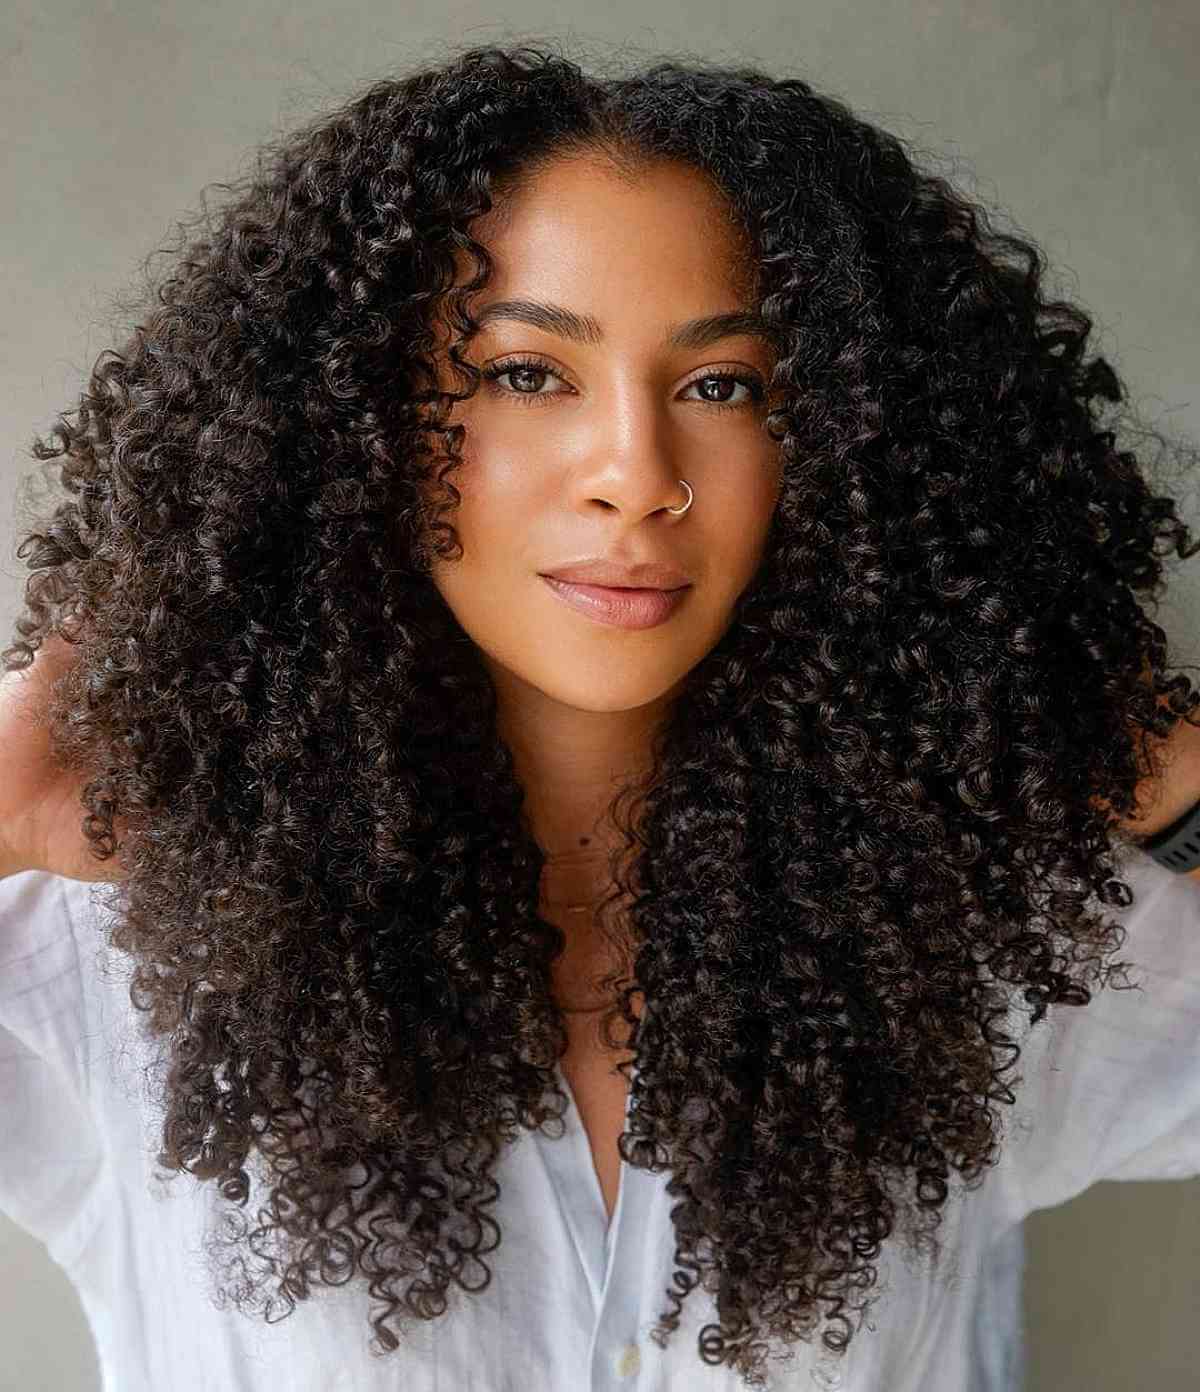 43 Easy Natural Hairstyles for Black Women with Any Hair Length